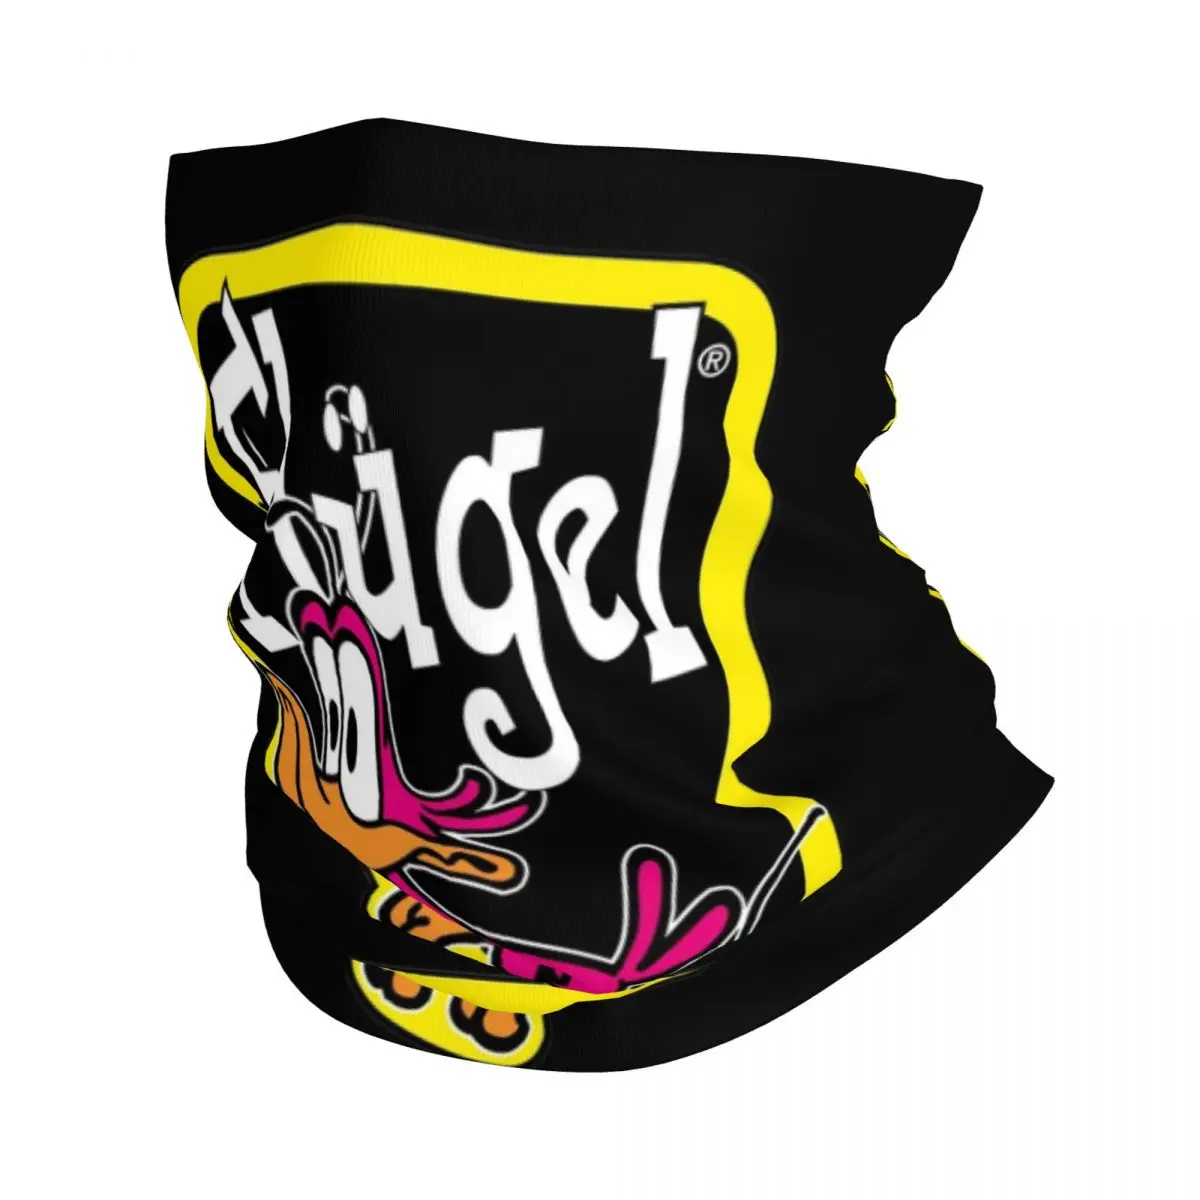 

Flugel Brass Band Bandana Neck Cover Printed Let The Duck Out Mask Scarf Multi-use Face Mask Riding Men Women Adult All Season